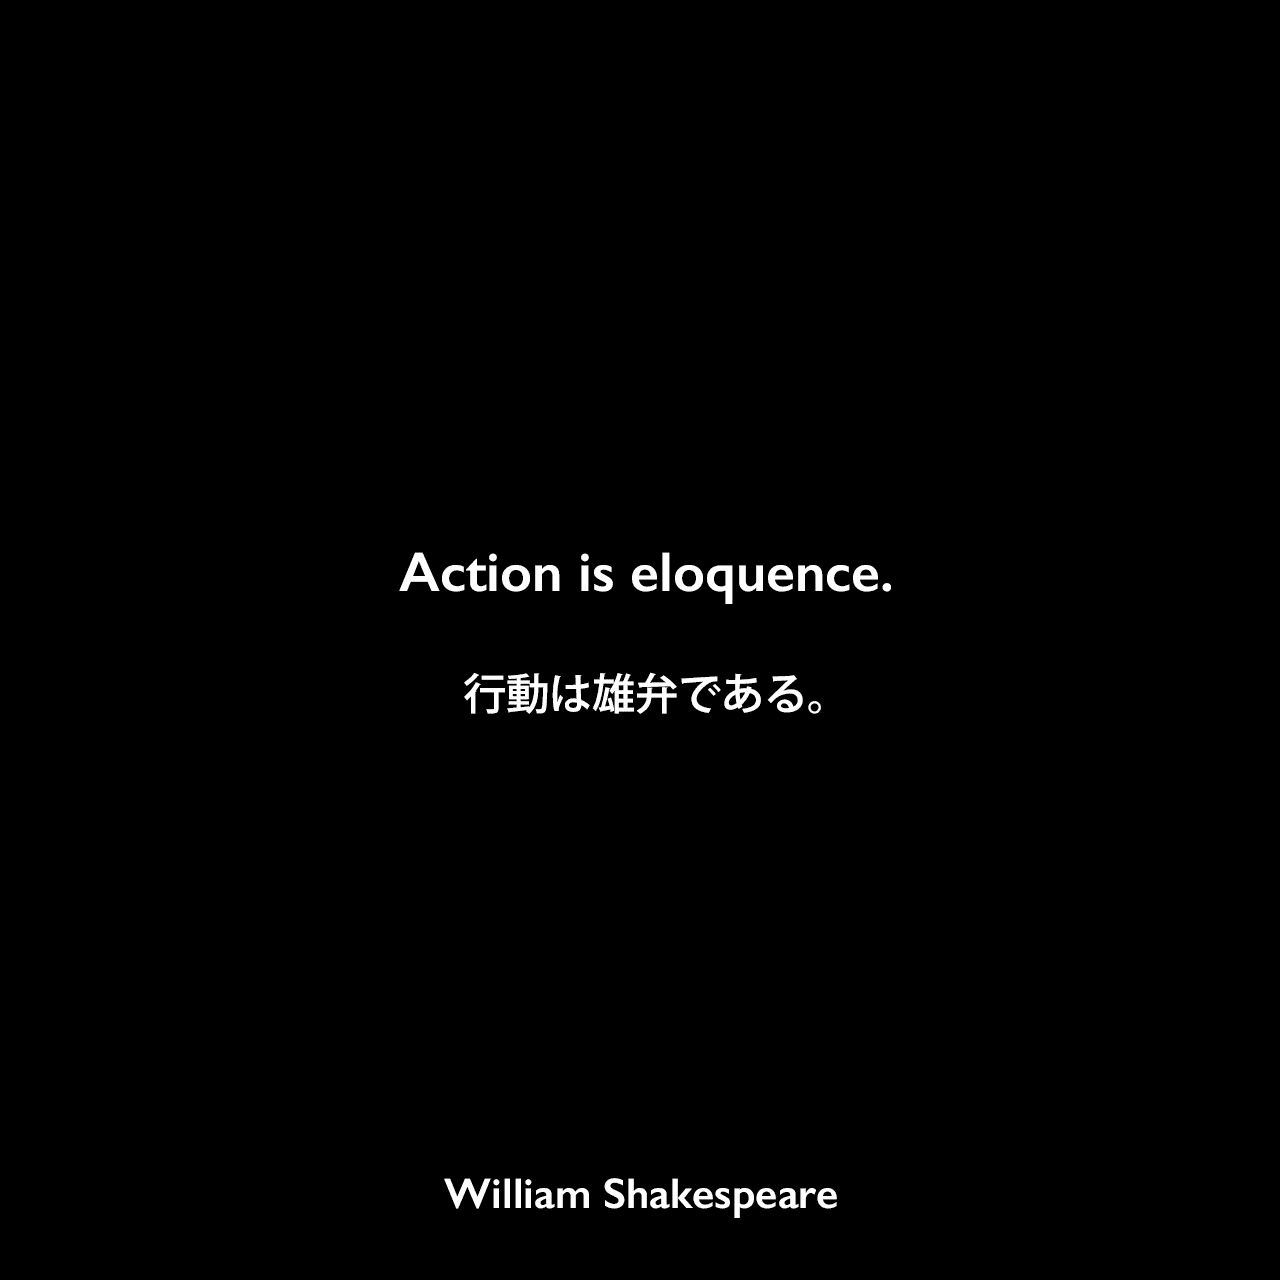 Action is eloquence.行動は雄弁である。William Shakespeare